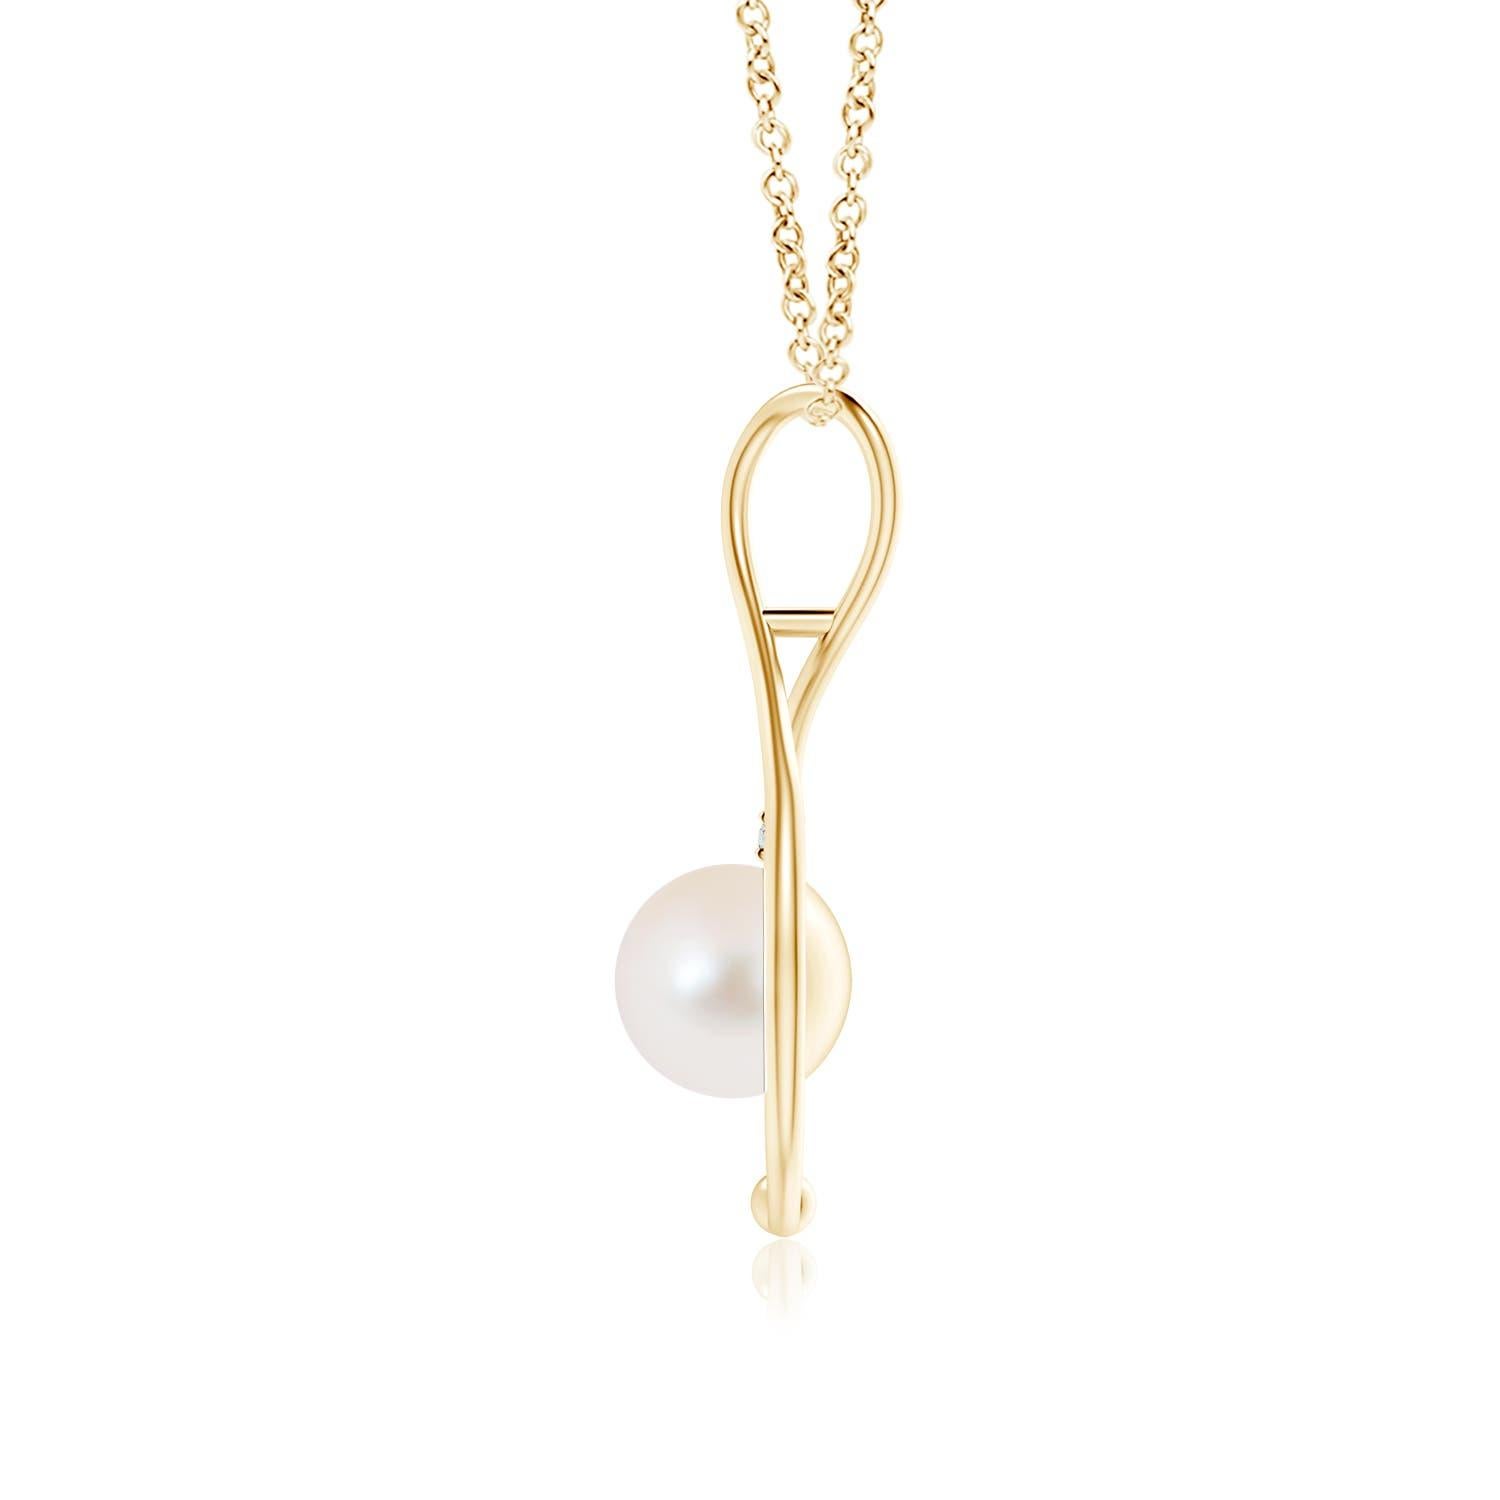 A modern classic, this pearl infinity necklace in 14K yellow gold is a beautiful interpretation of the popular infinity symbol. The infinity loop softly cuddles the round Freshwater cultured pearl to evoke a feeling of tenderness. The glimmering